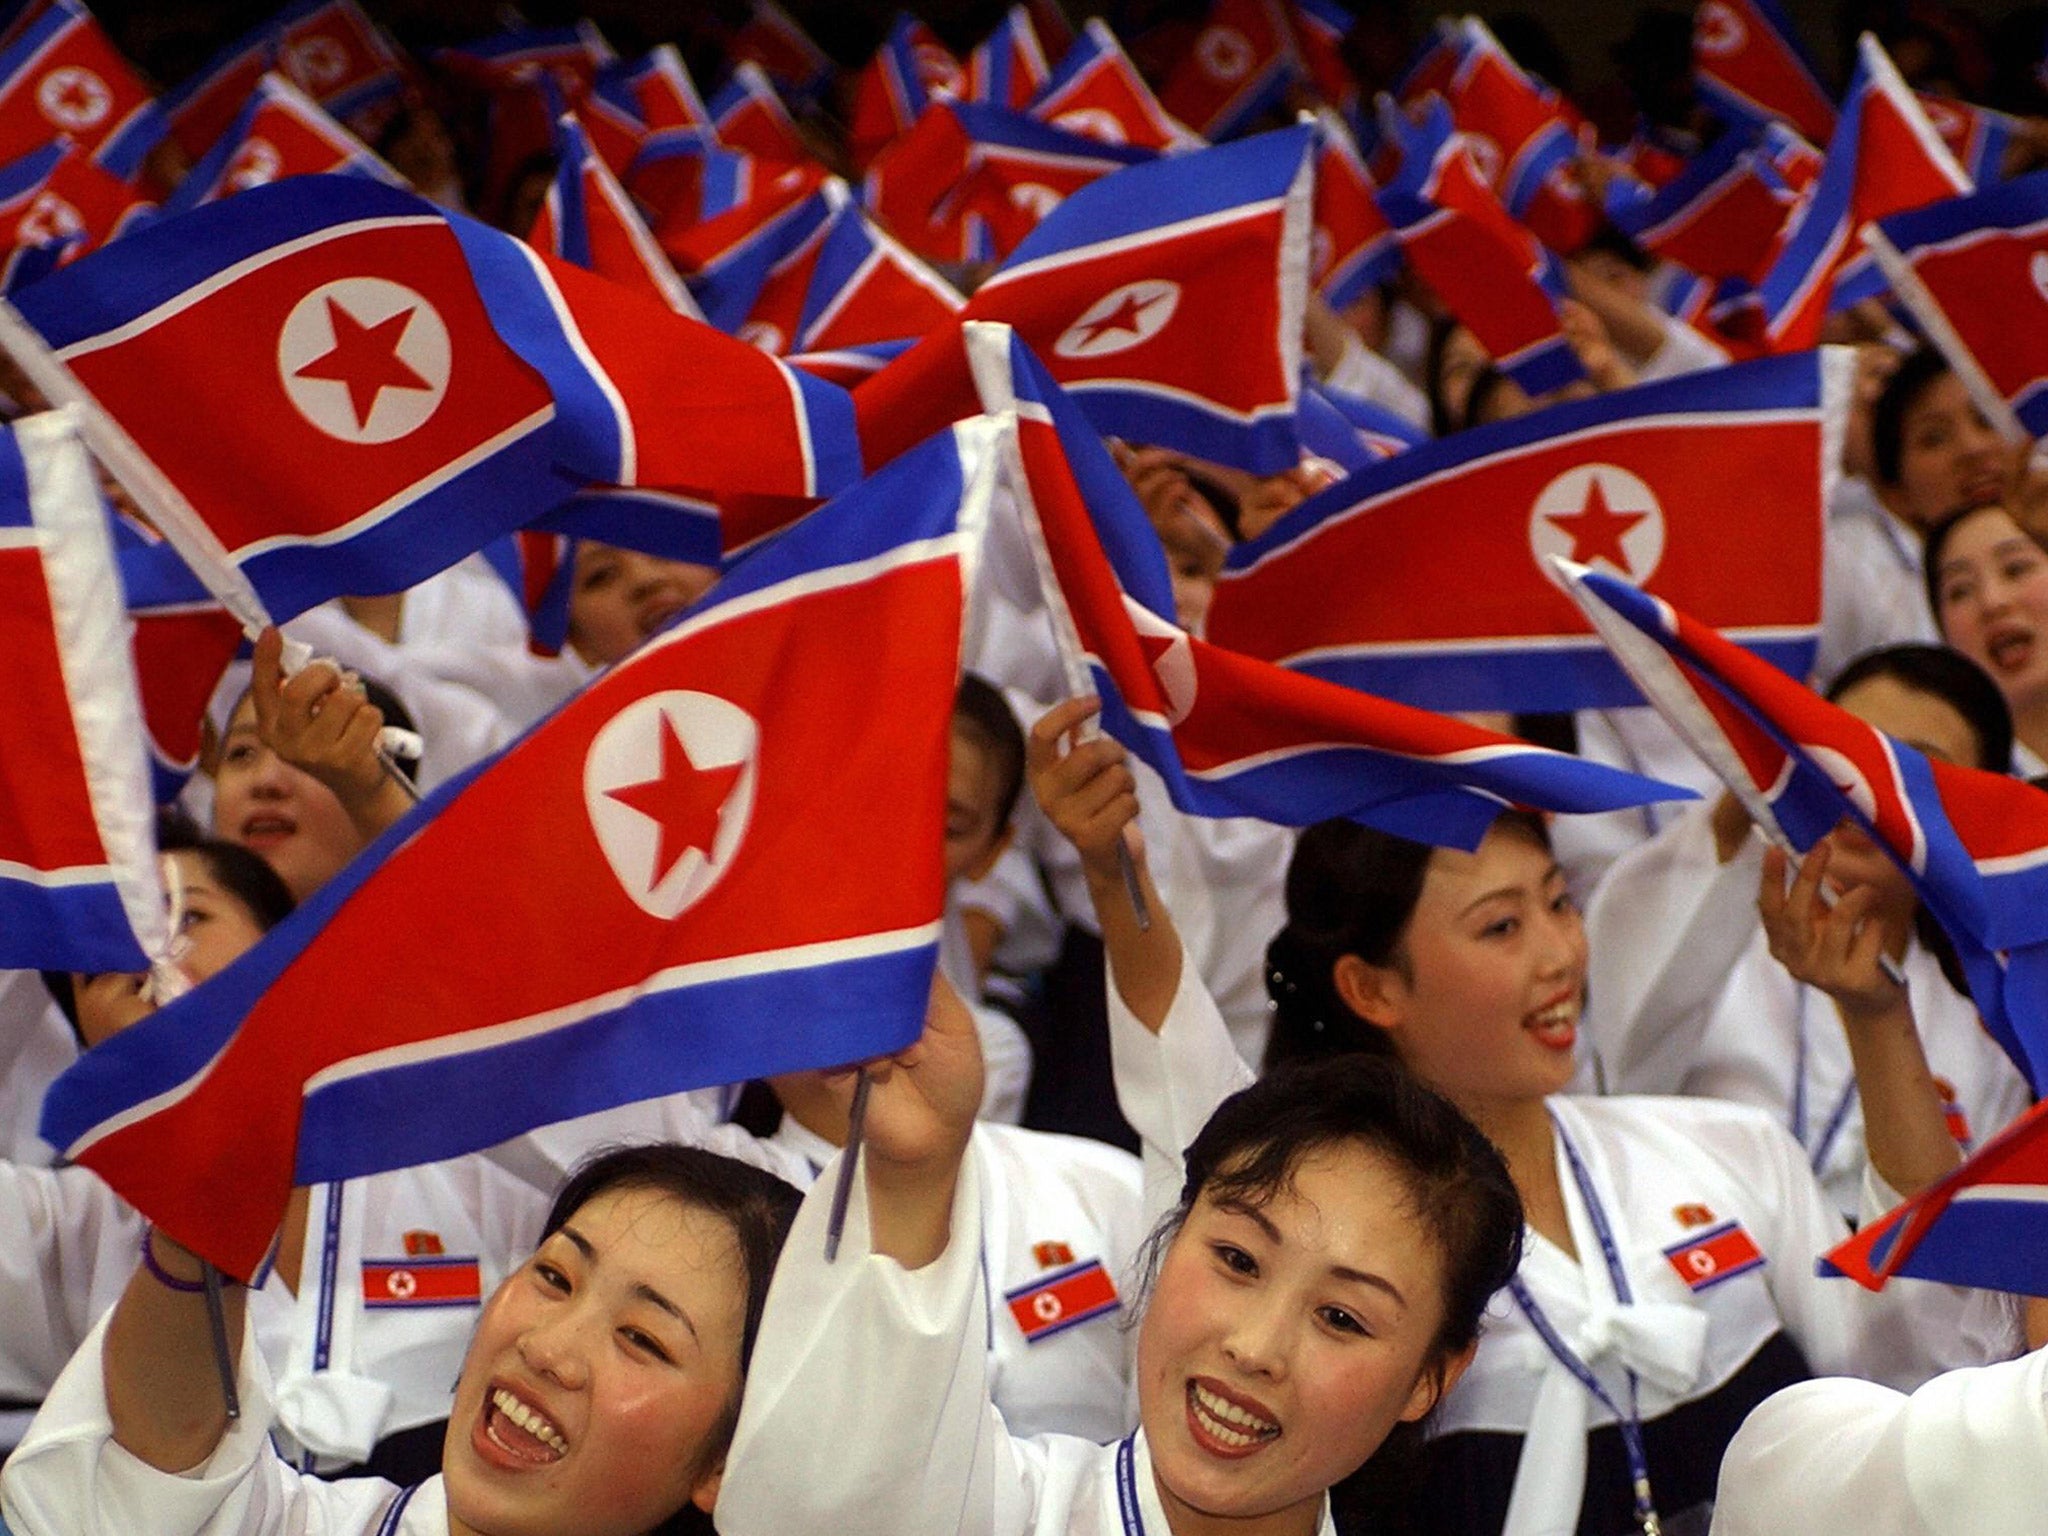 North Korean cheerleaders wave their national flags during the World Student Games in Daegu, South Korea, in 2003